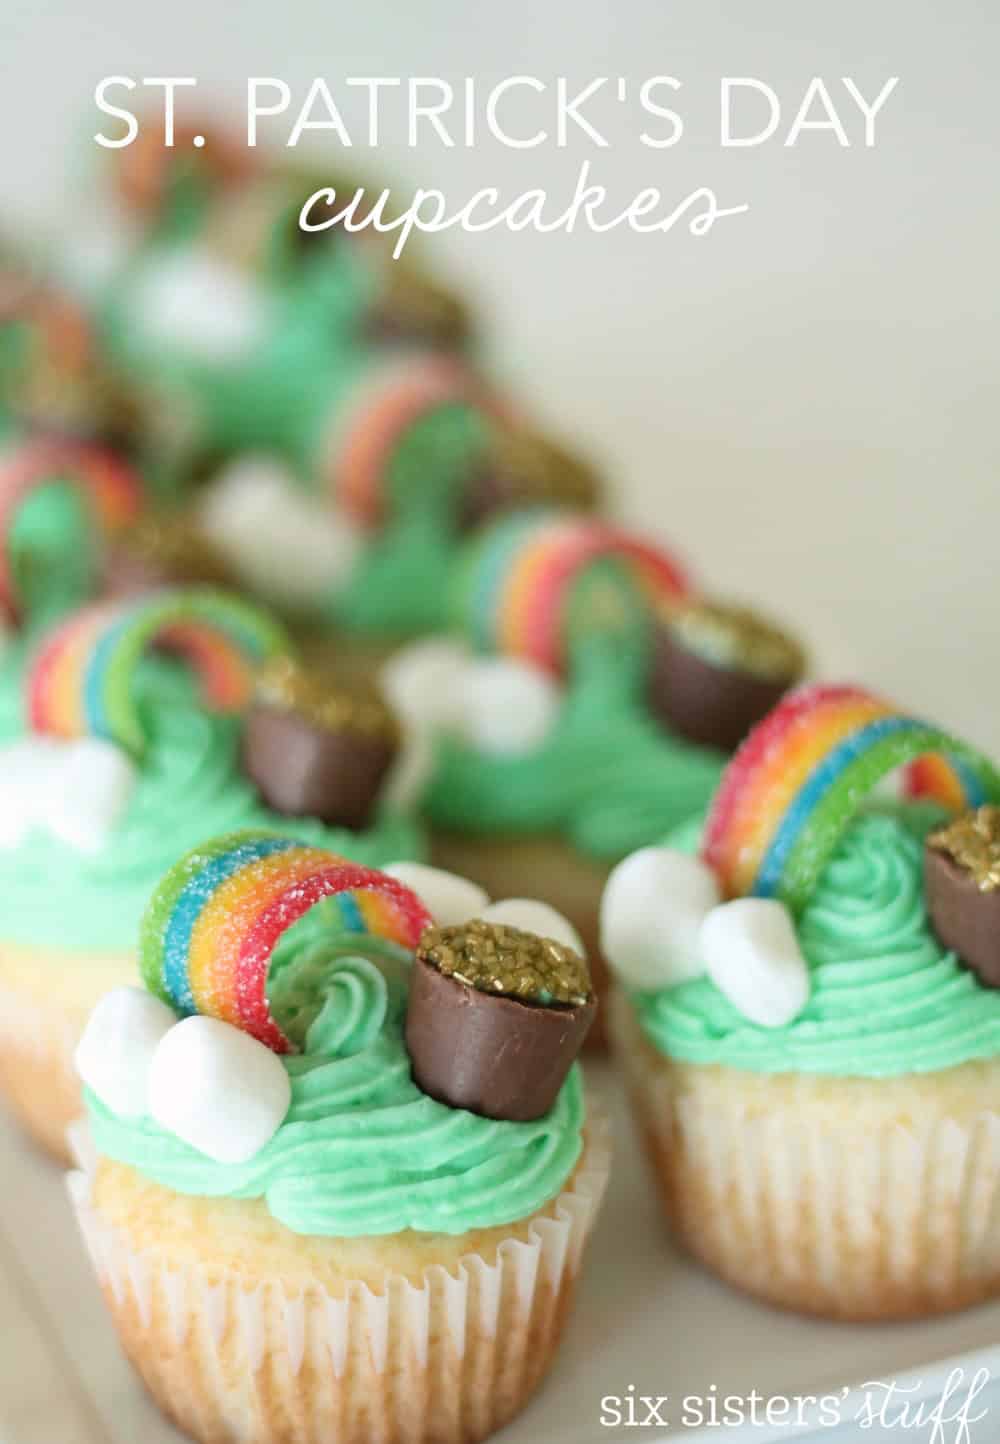 Snowman Cupcakes - Our Kid Things